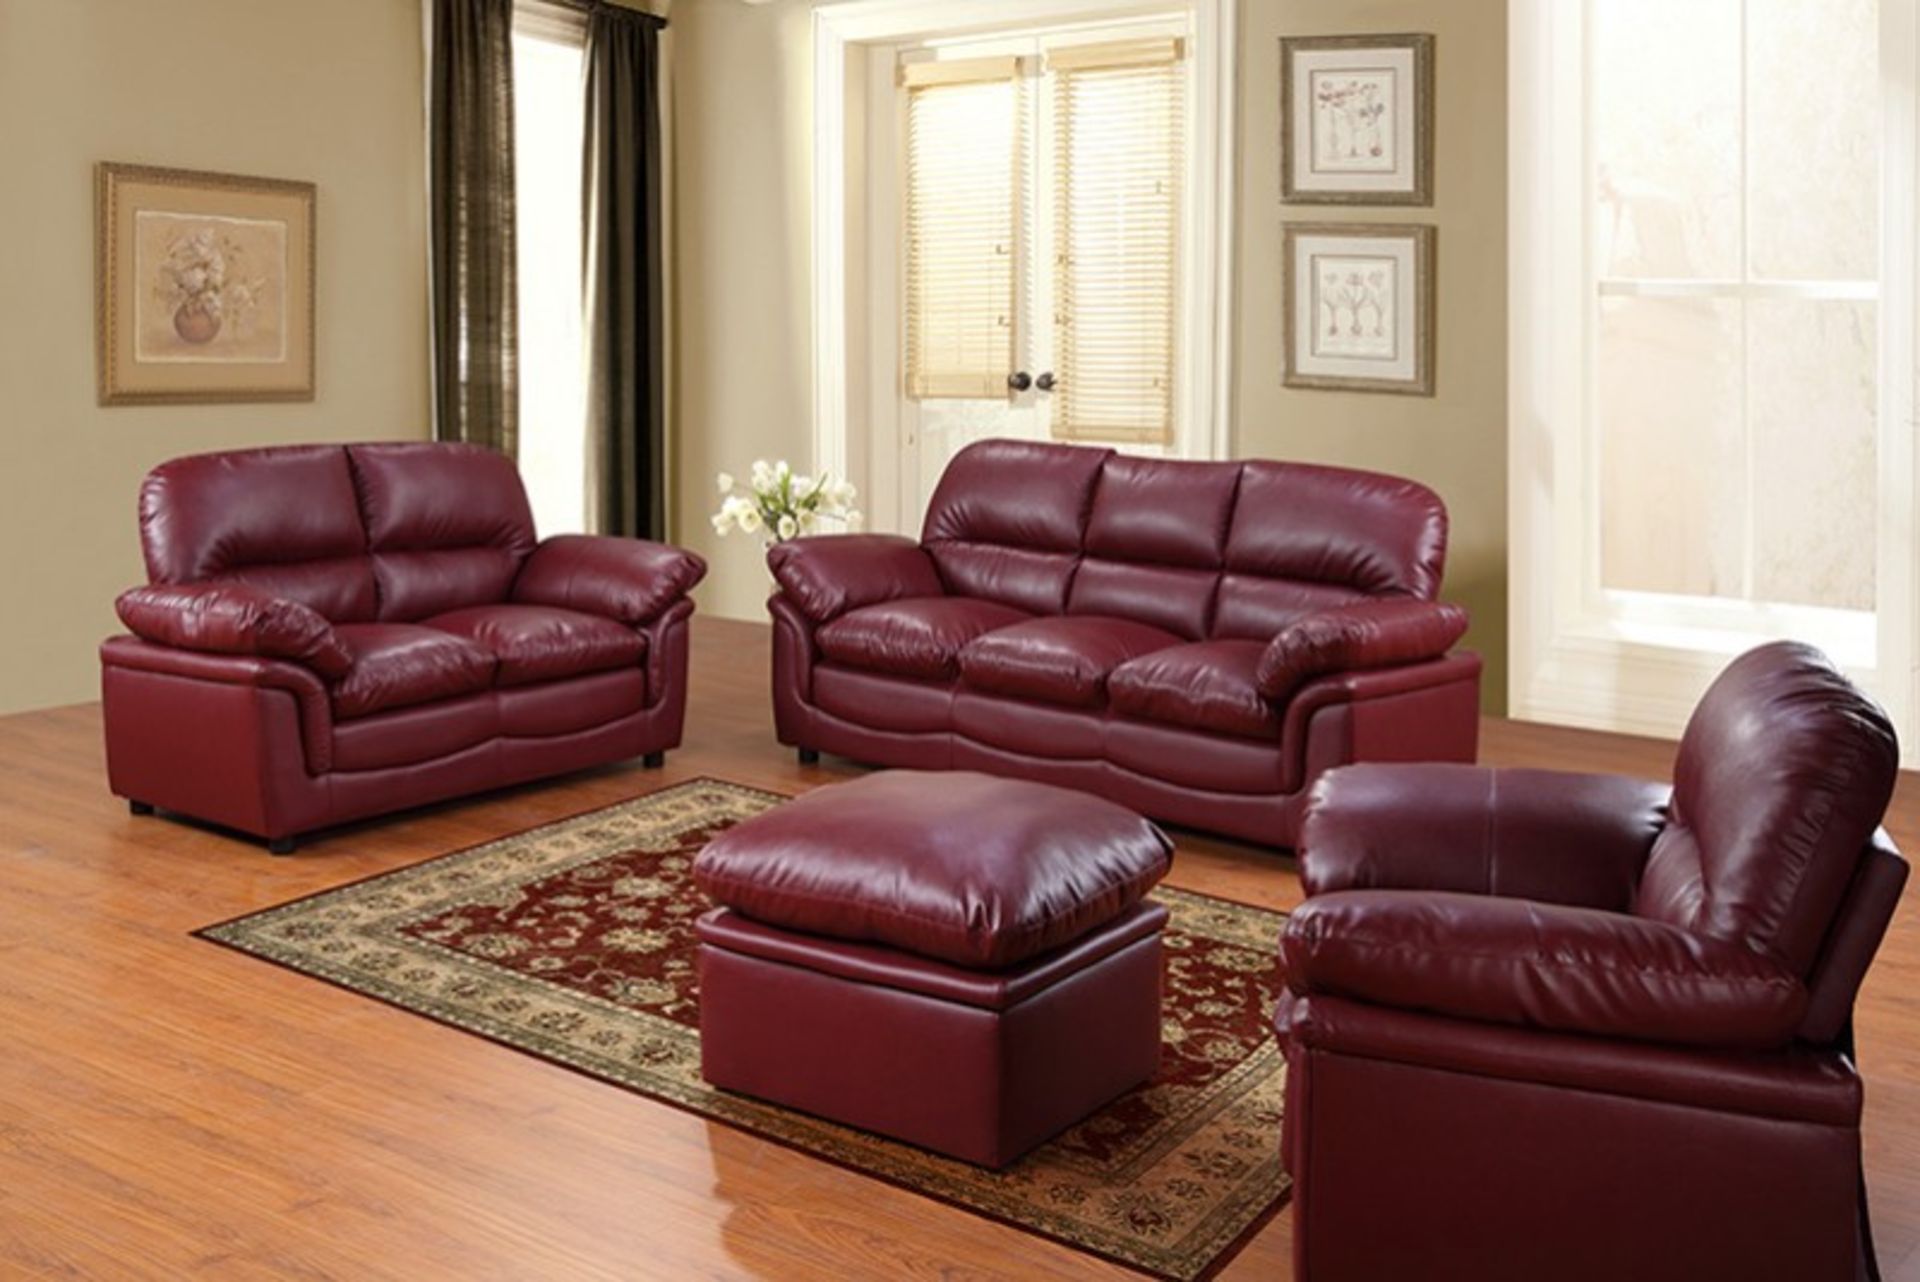 veronica 2 seater sofa in rich burgandy leather plus 2 seater veronica sofa in rich burgandy leather